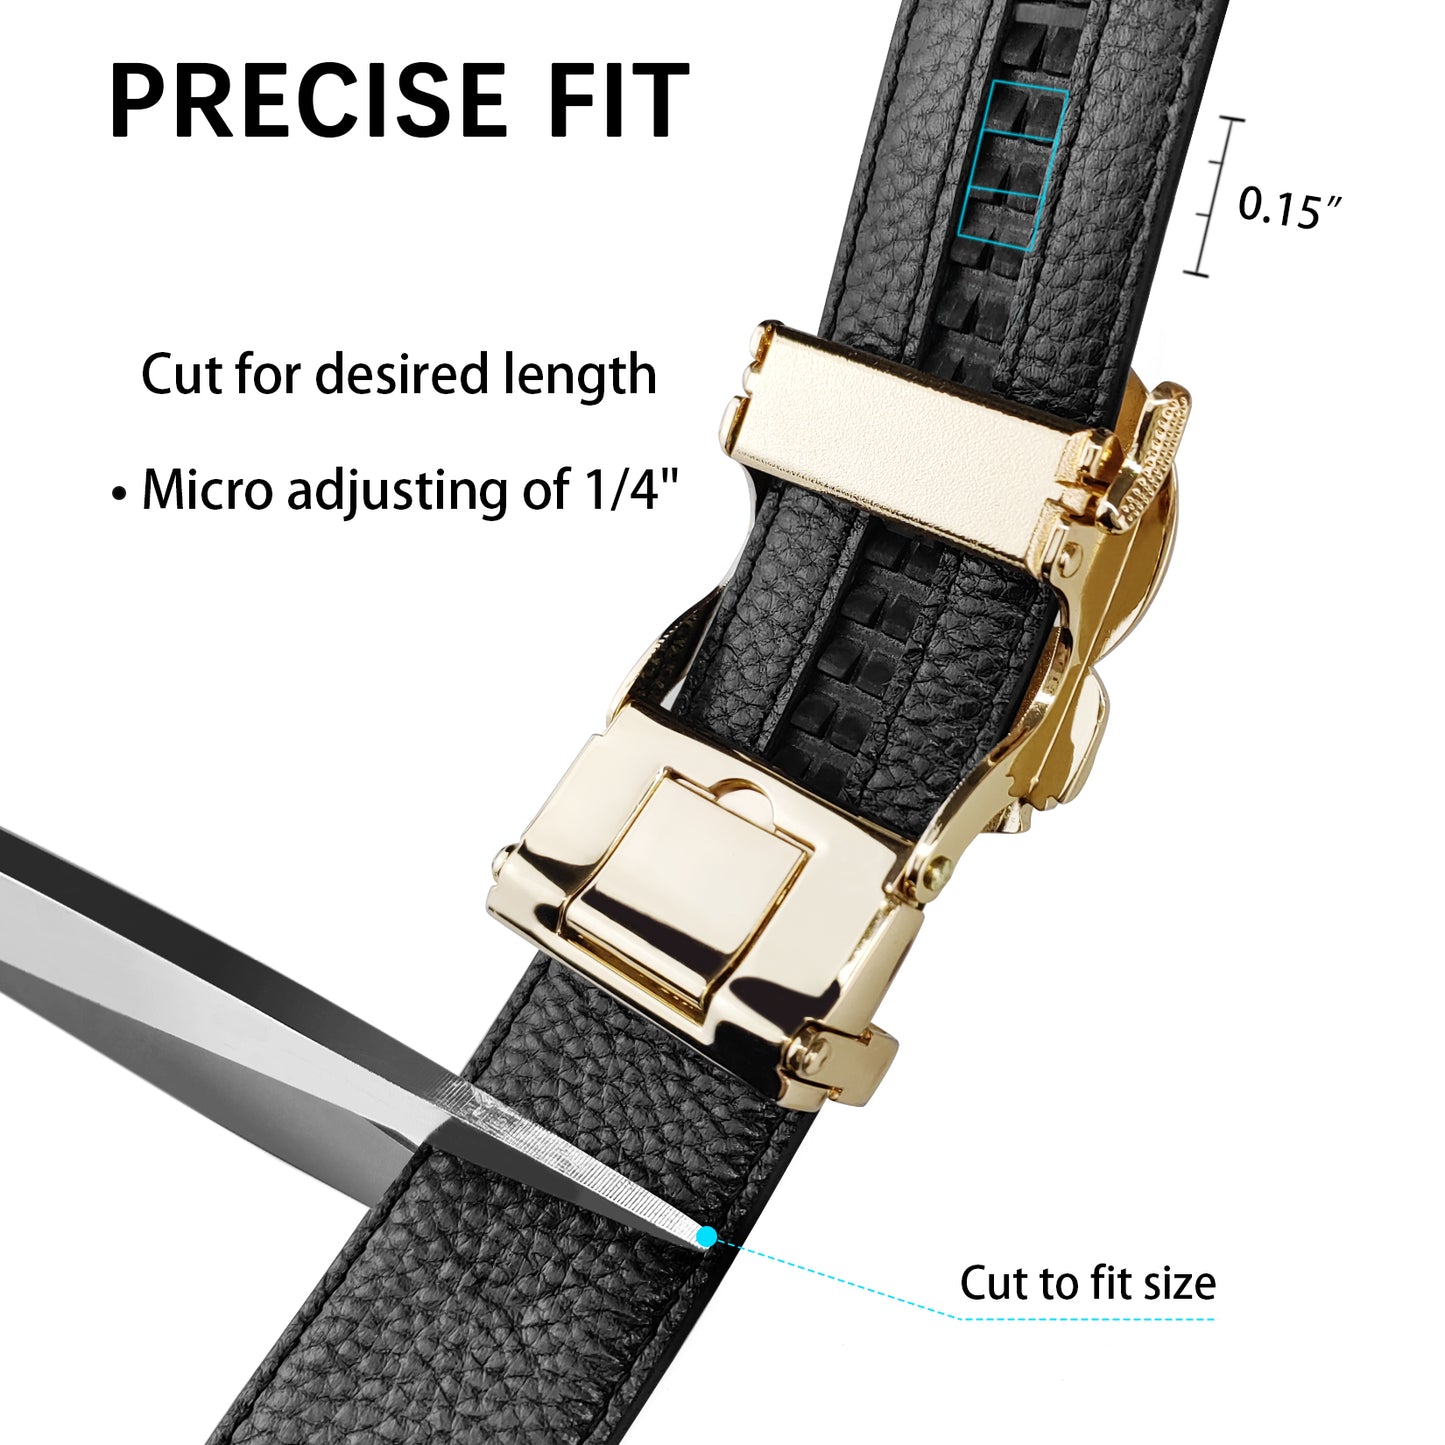 "COIPDFTY New Releases": Limited Edition Men's Fashion Belts"